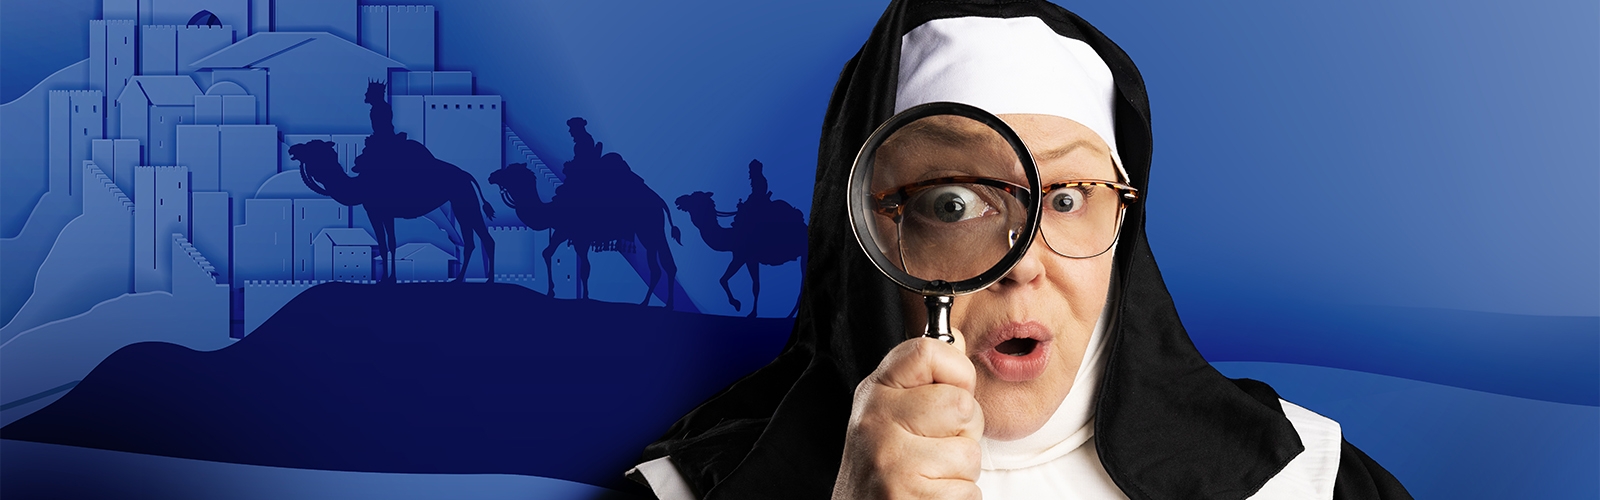 A nun holds a magnifying glass up to her eye in front of a graphic of the three magi approaching Bethlehem.